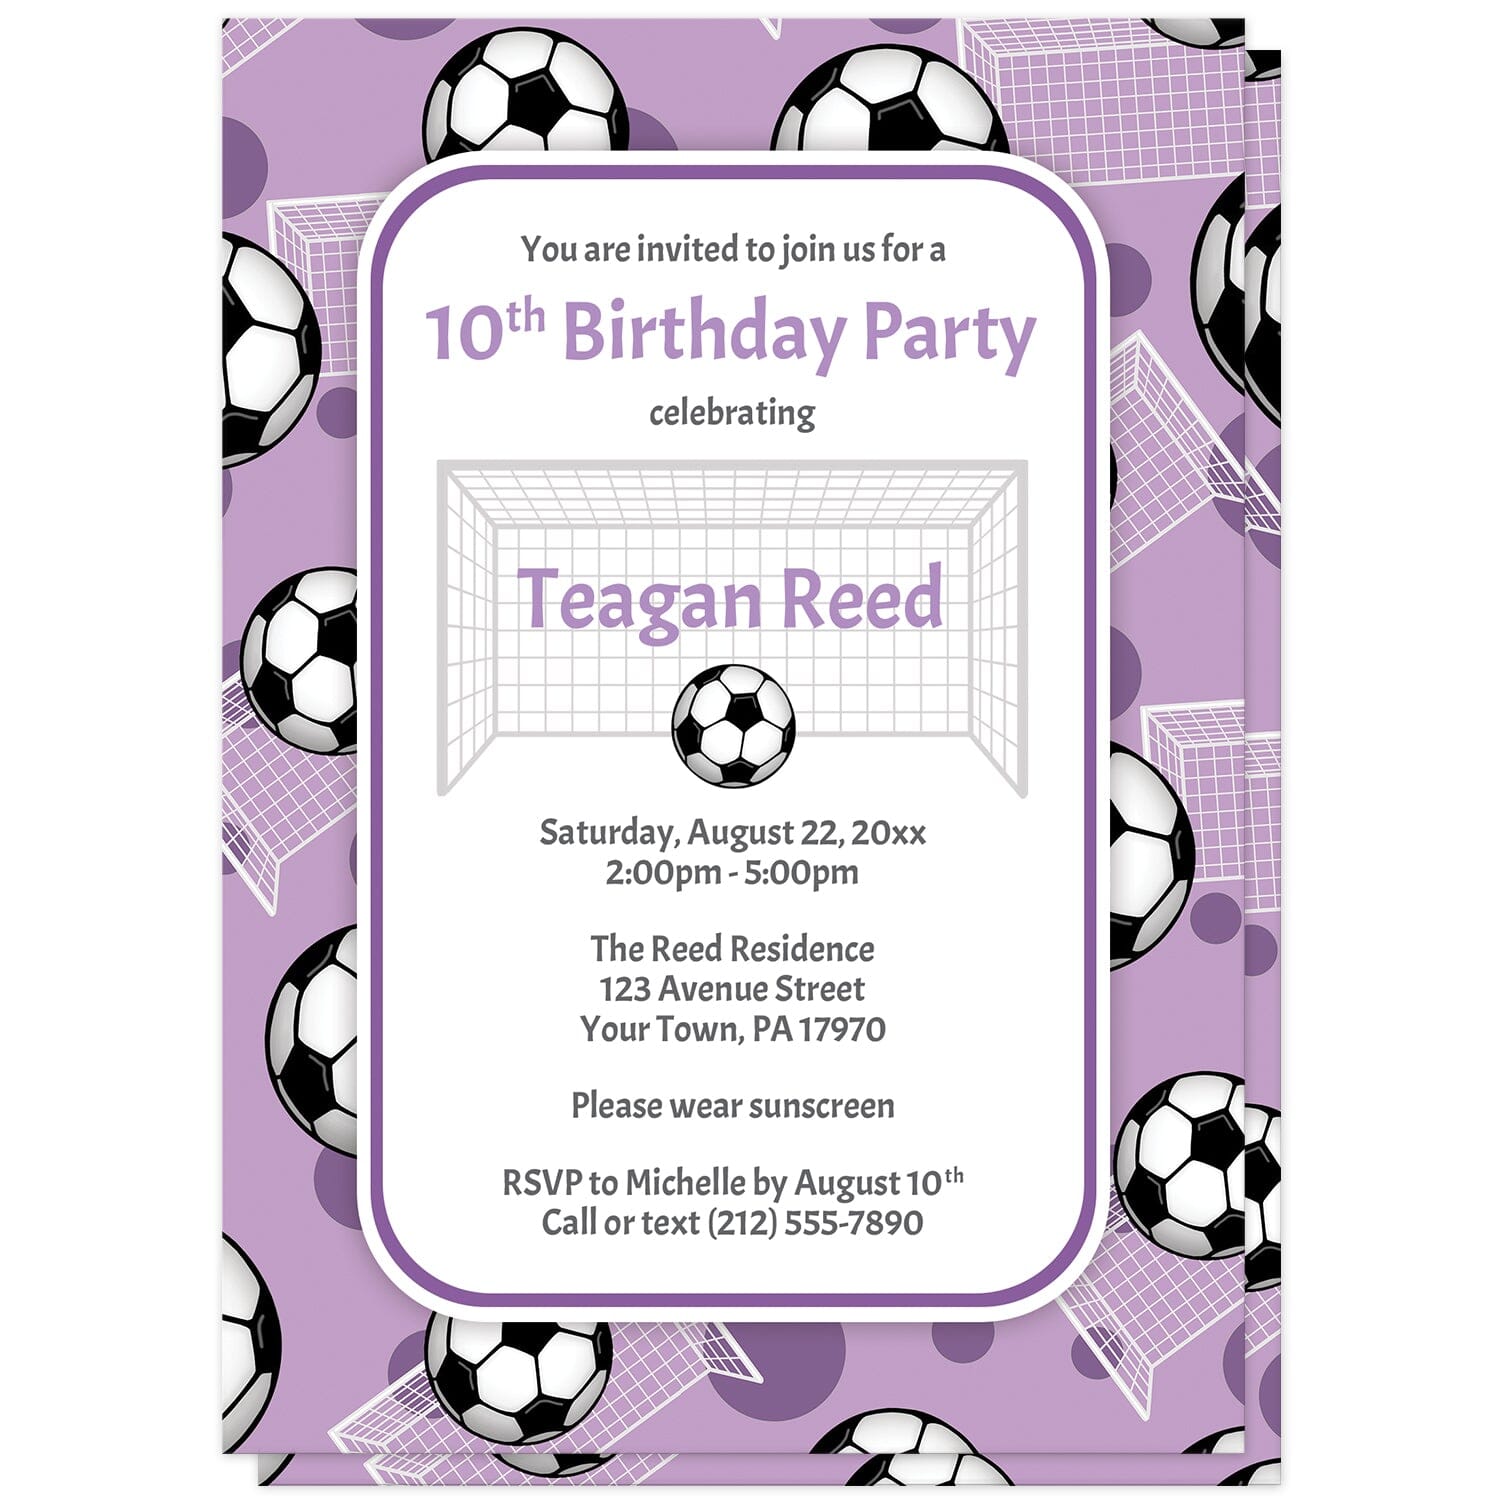 Soccer Ball and Goal Purple Birthday Party Invitations at Artistically Invited. Sports-themed soccer ball and goal purple birthday party invitations for any age or milestone that are uniquely illustrated with a pattern of soccer balls and soccer goals over a purple background color. Your personalized birthday party details are custom printed in purple and gray over white in the center over the soccer pattern.